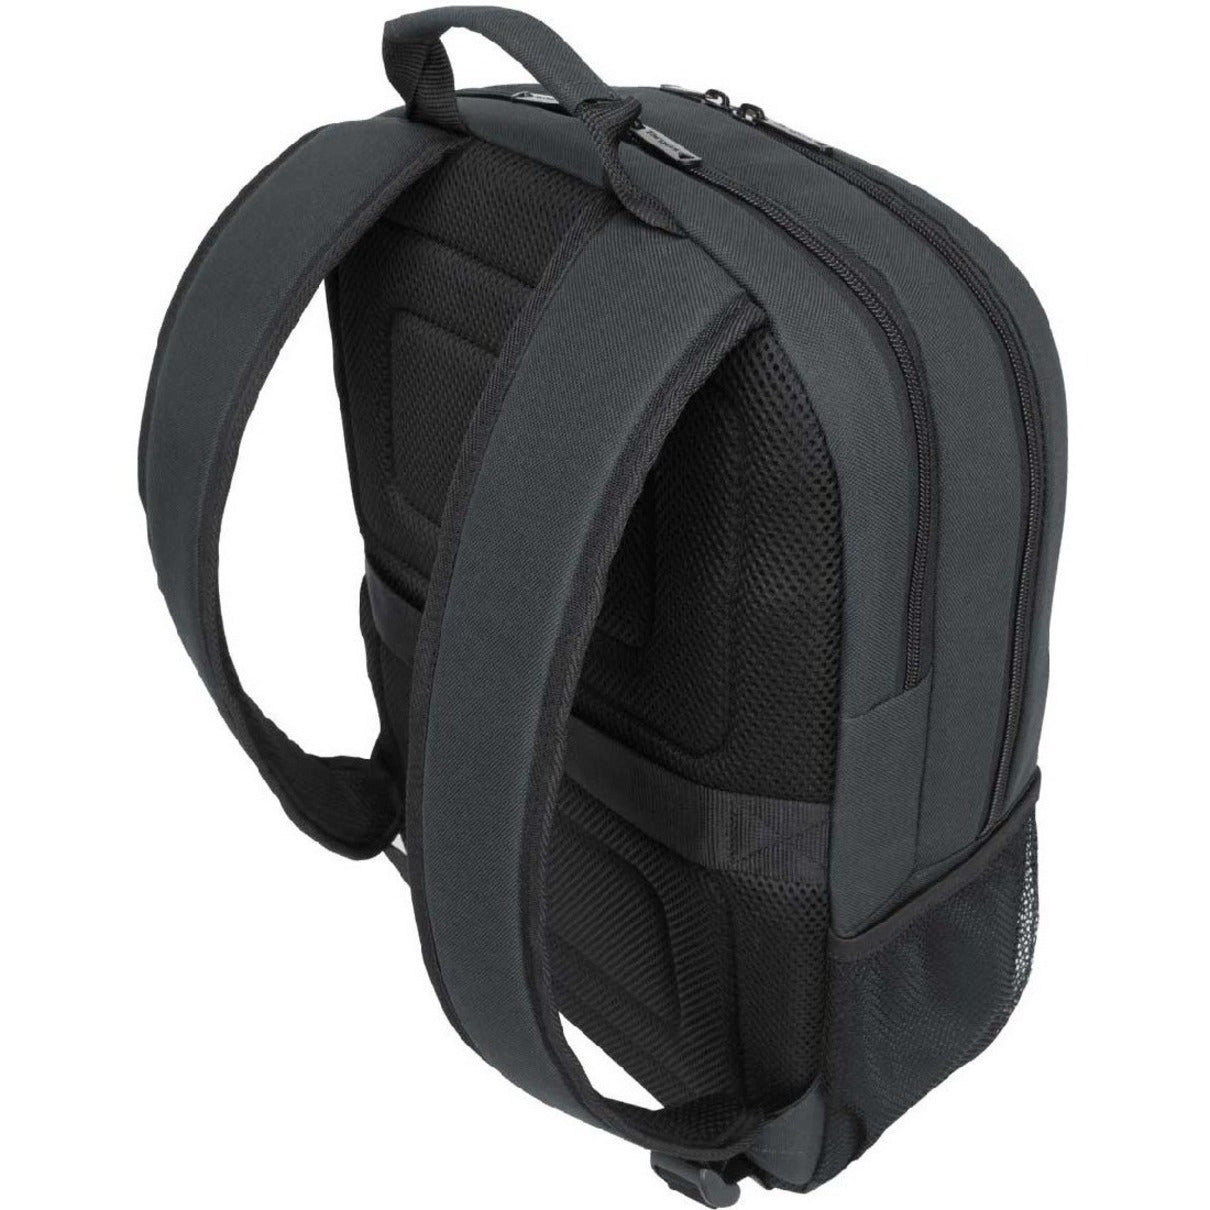 Targus Carrying Case (Backpack) for 15.6" Notebook - Black (TSB96201GL) Top image